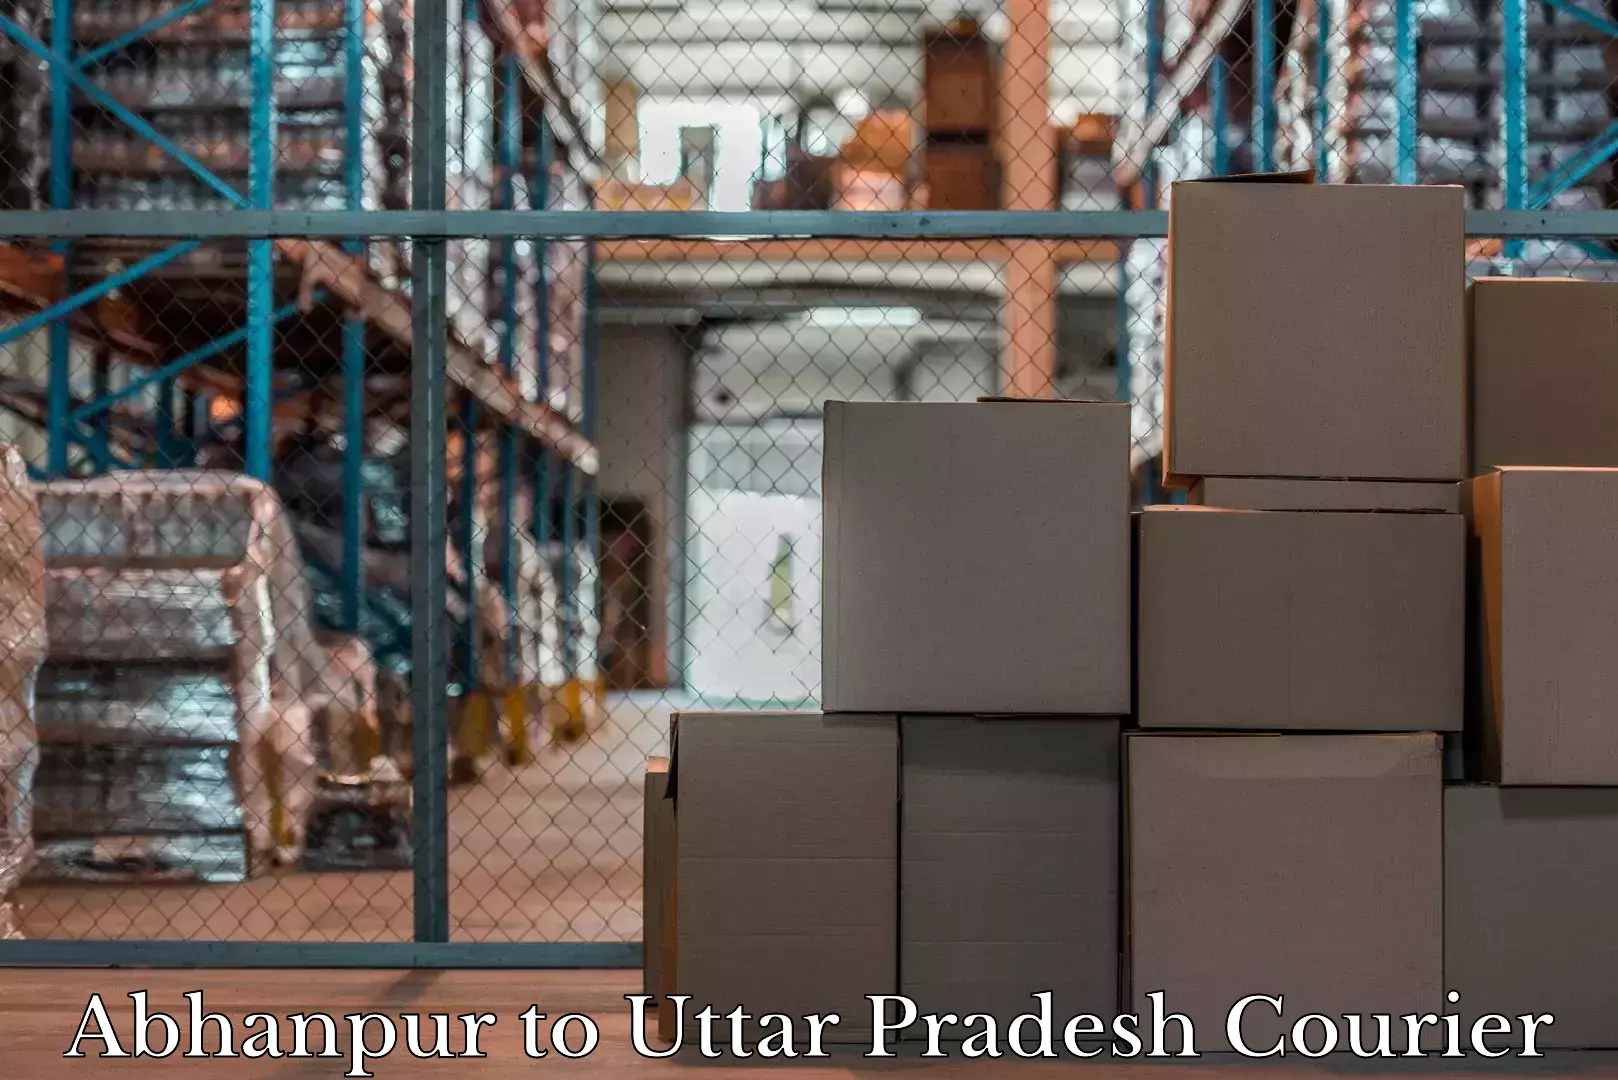 Baggage transport logistics Abhanpur to Ayodhya